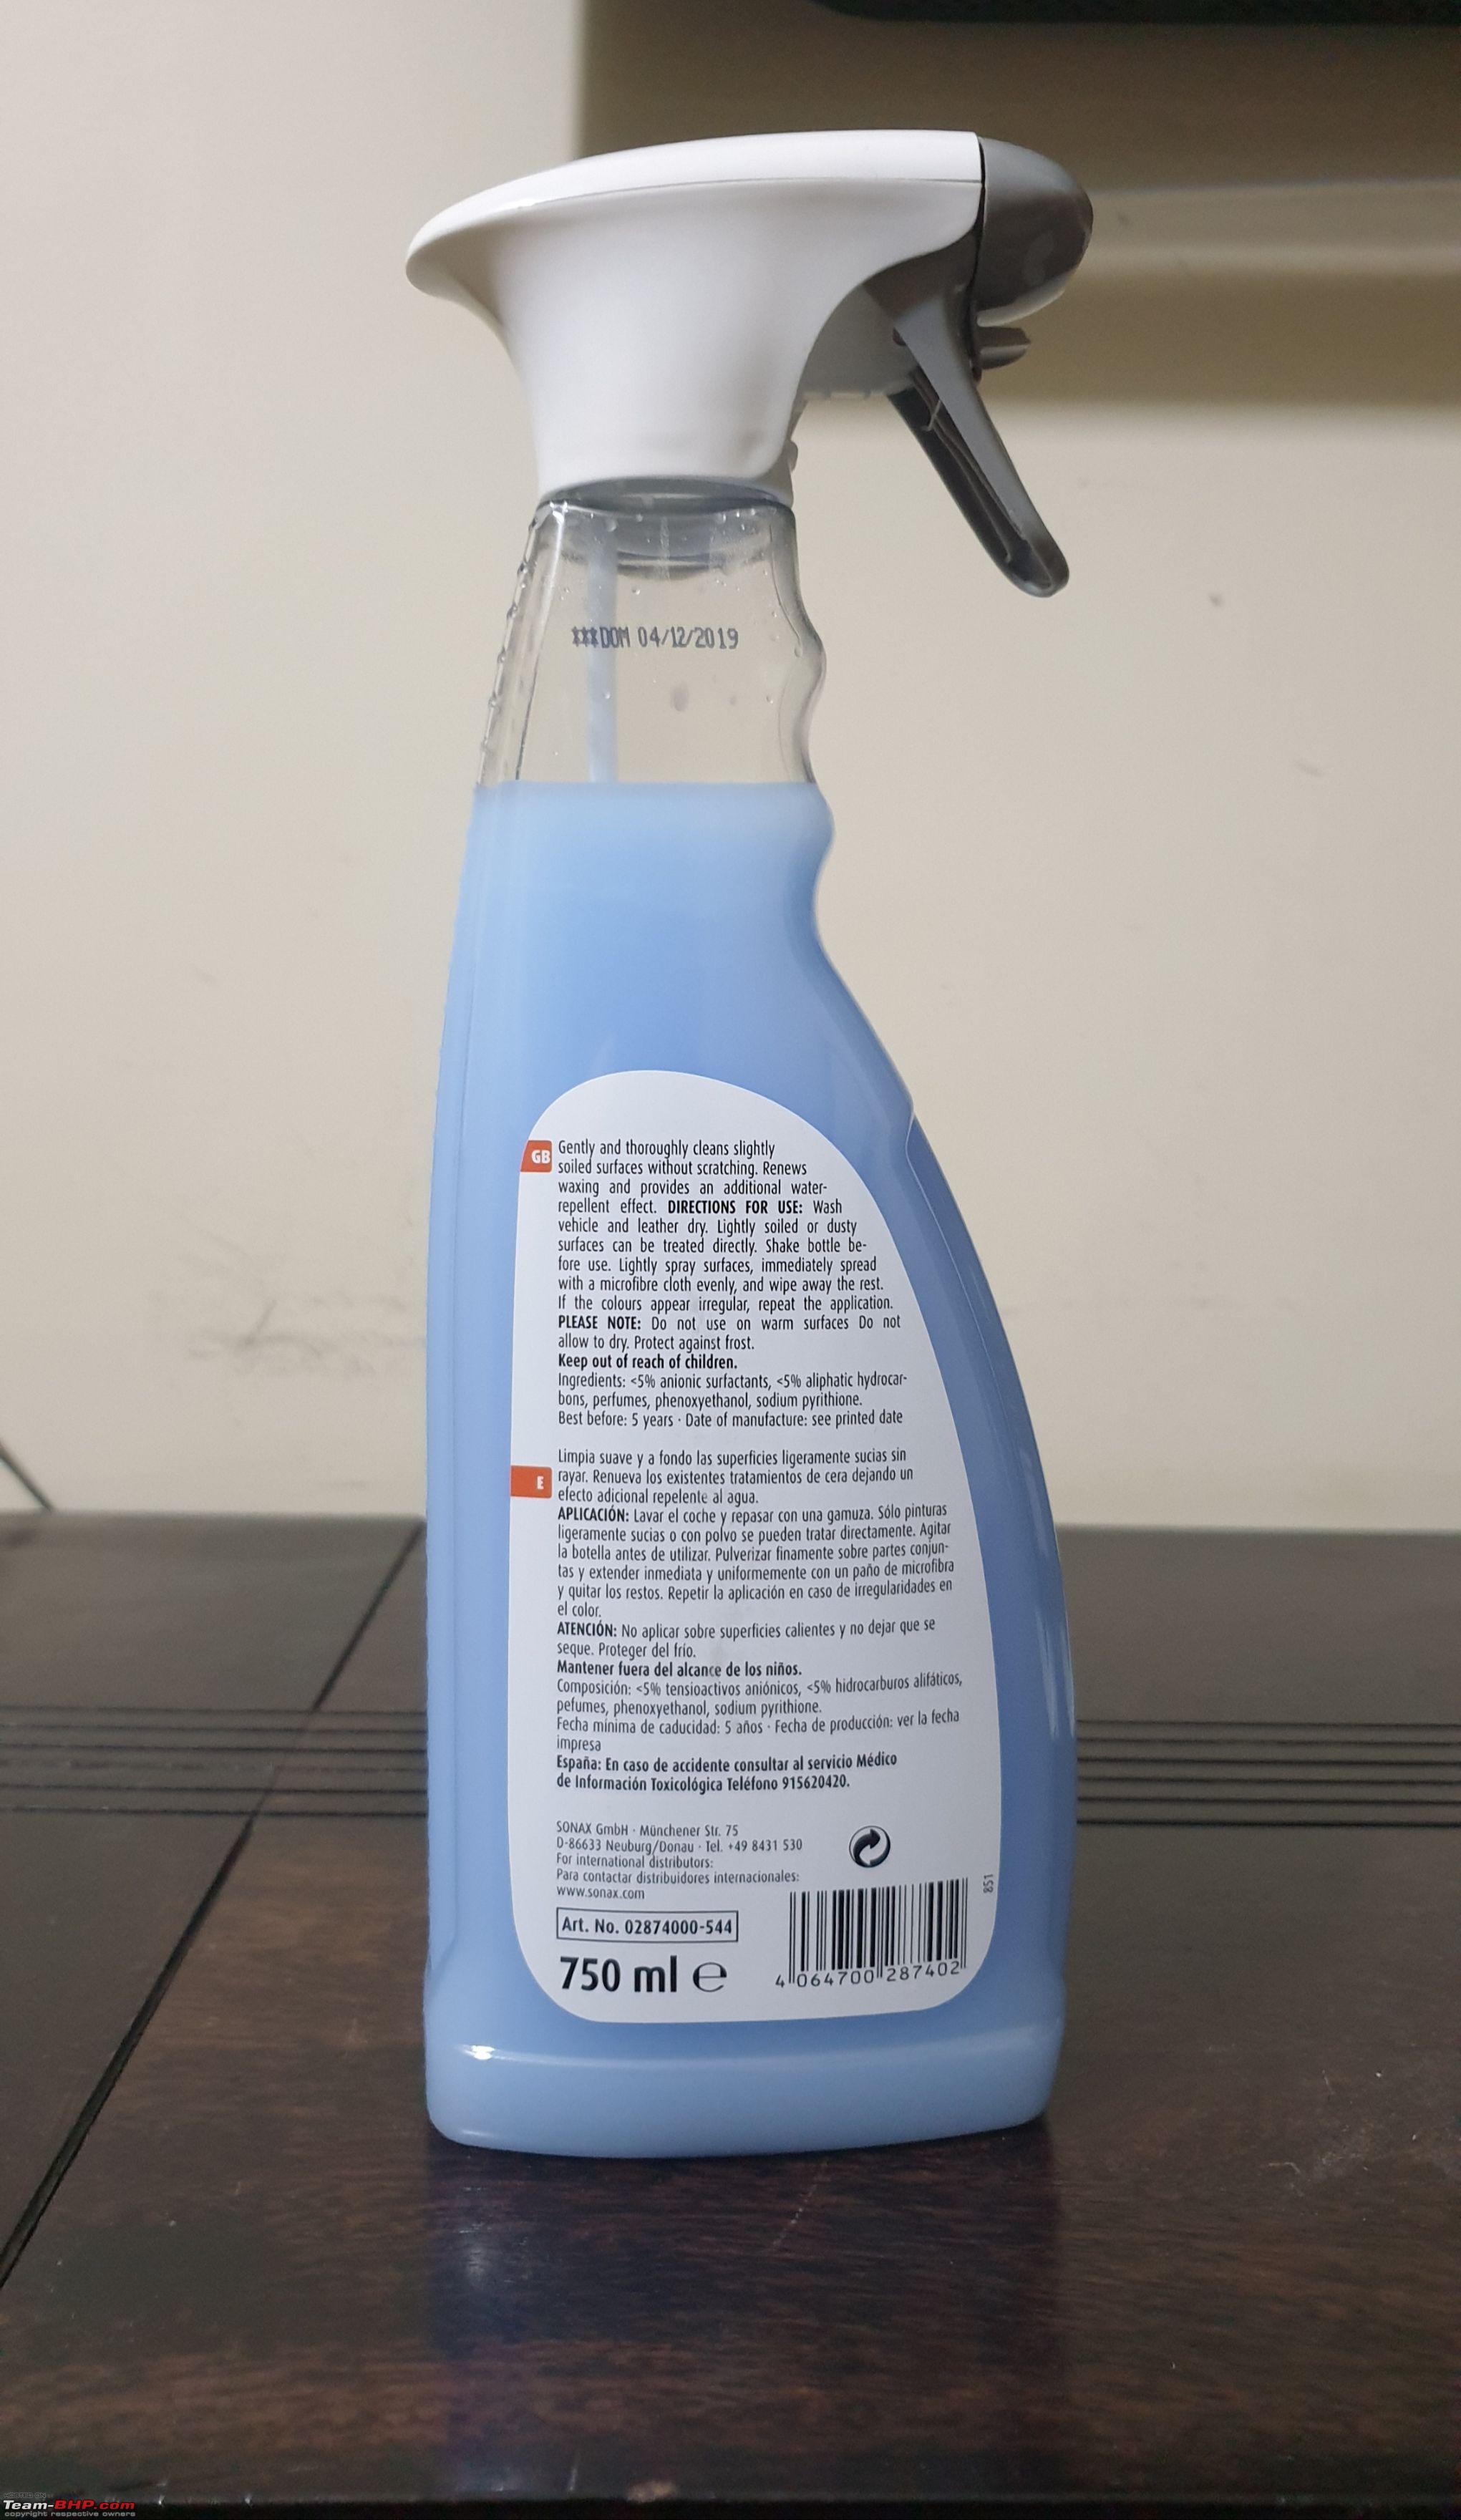 Sonax bsd the most hydrophobic spray lsp? - Page 3